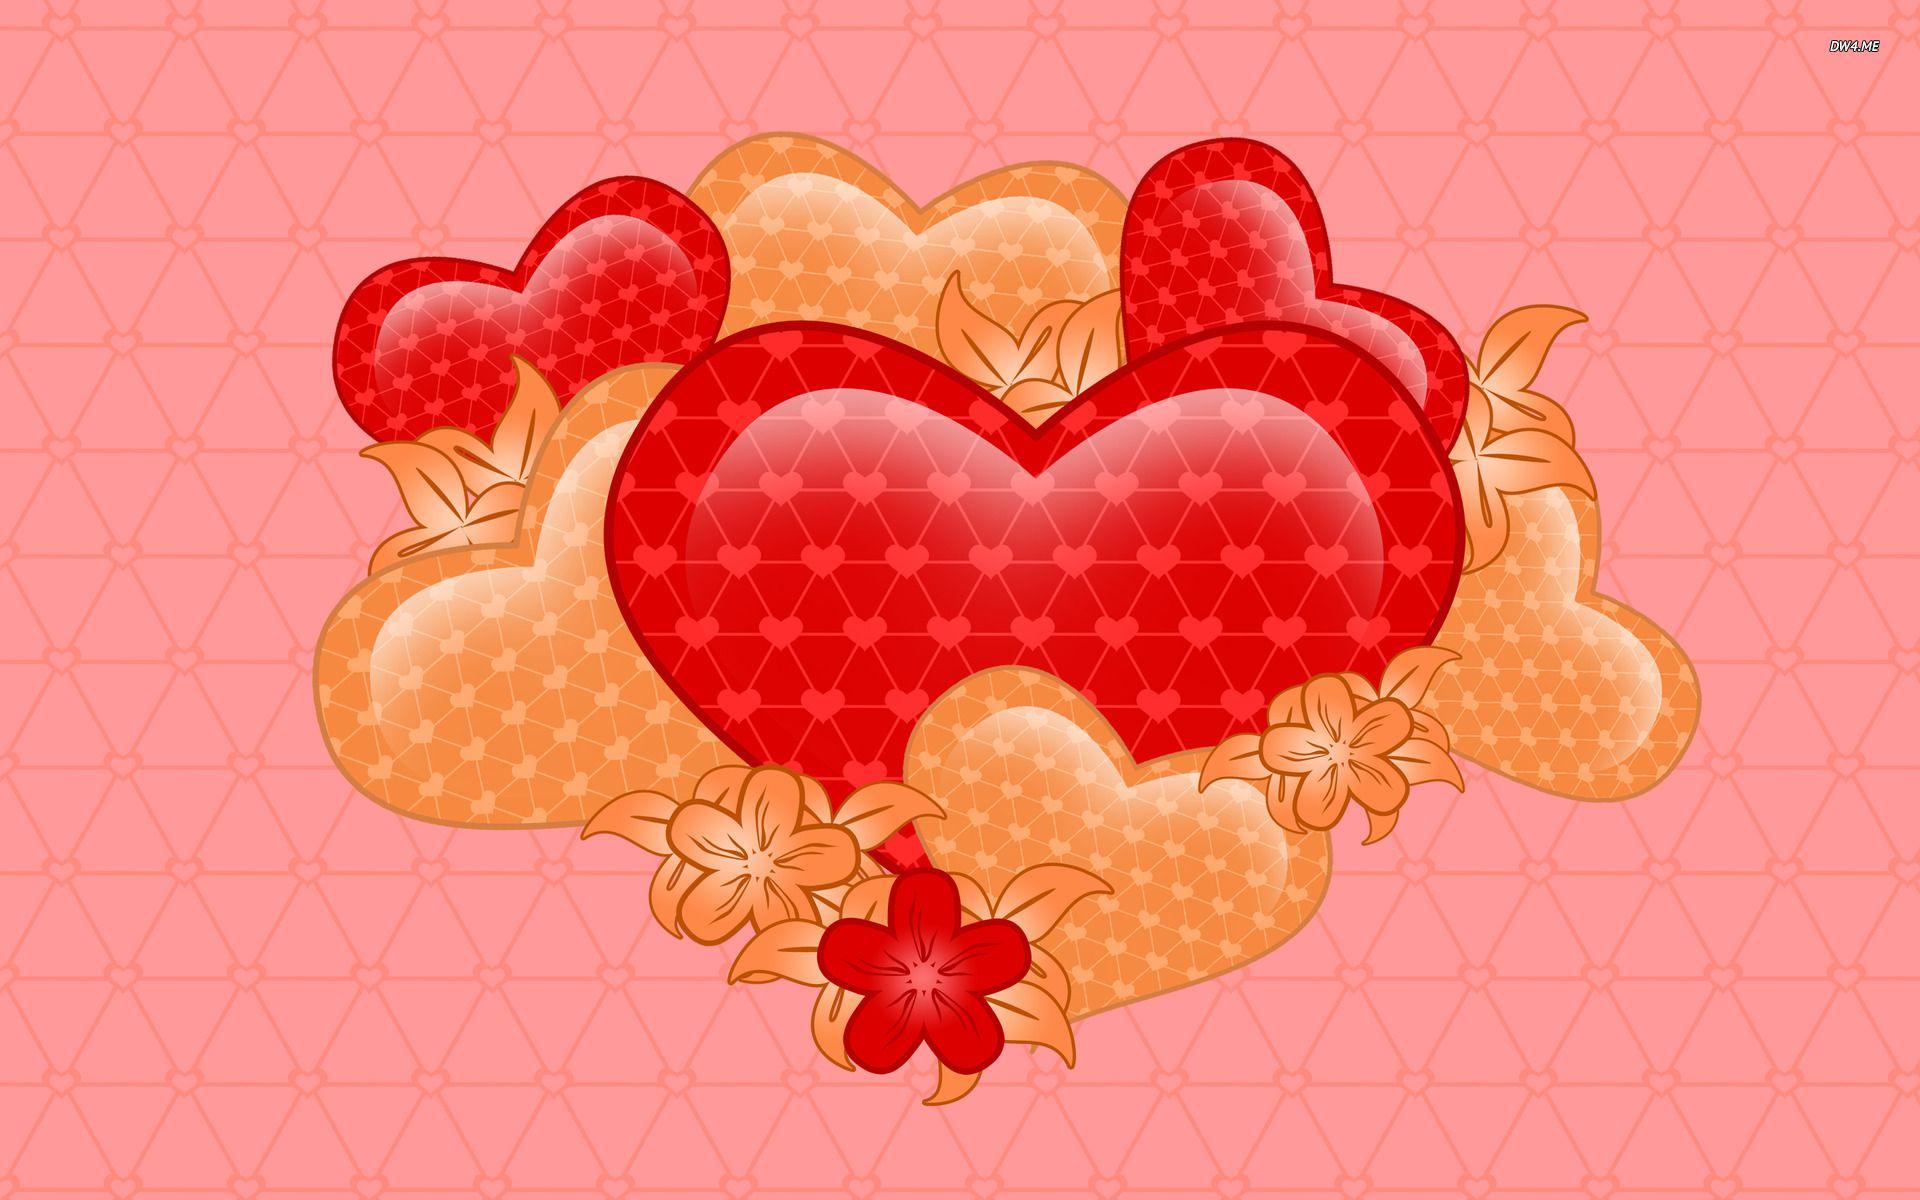 Wallpapers For > Hearts And Flowers Wallpapers For Mobile